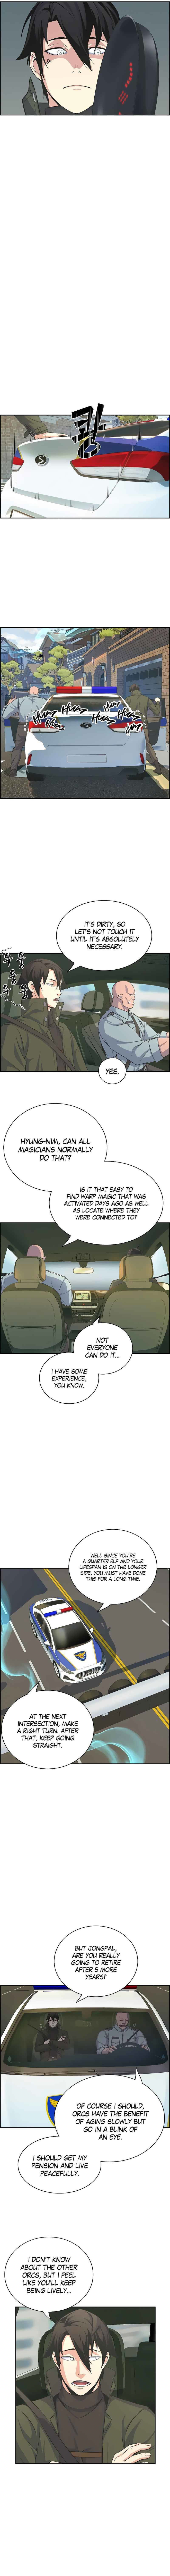 Foreigner on the Periphery Chapter 4 page 8